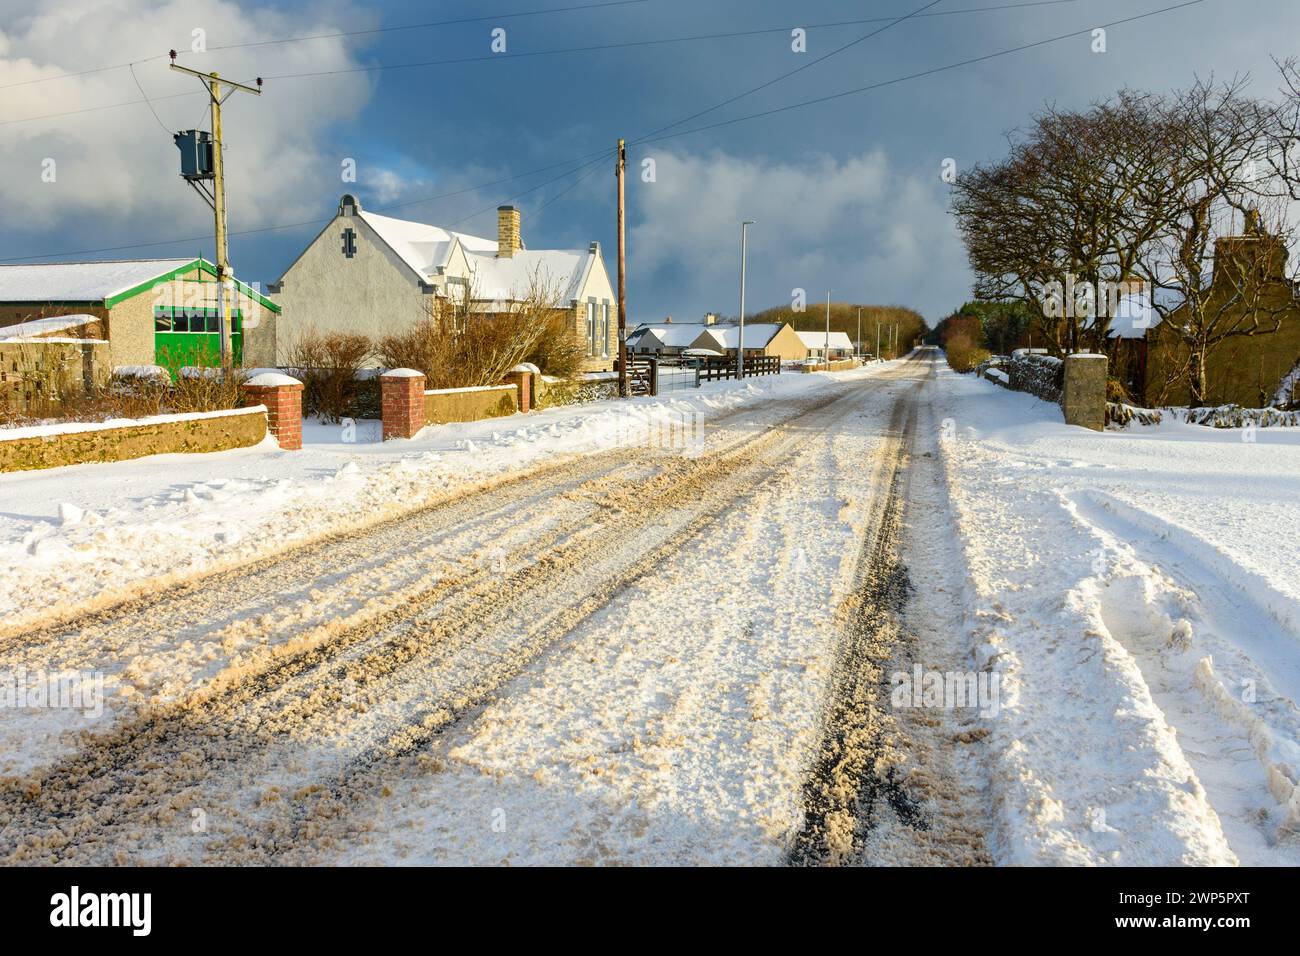 The A836 trunk road after a heavy snow fall, at the village of Mey, Caithness, Scotland, UK Stock Photo